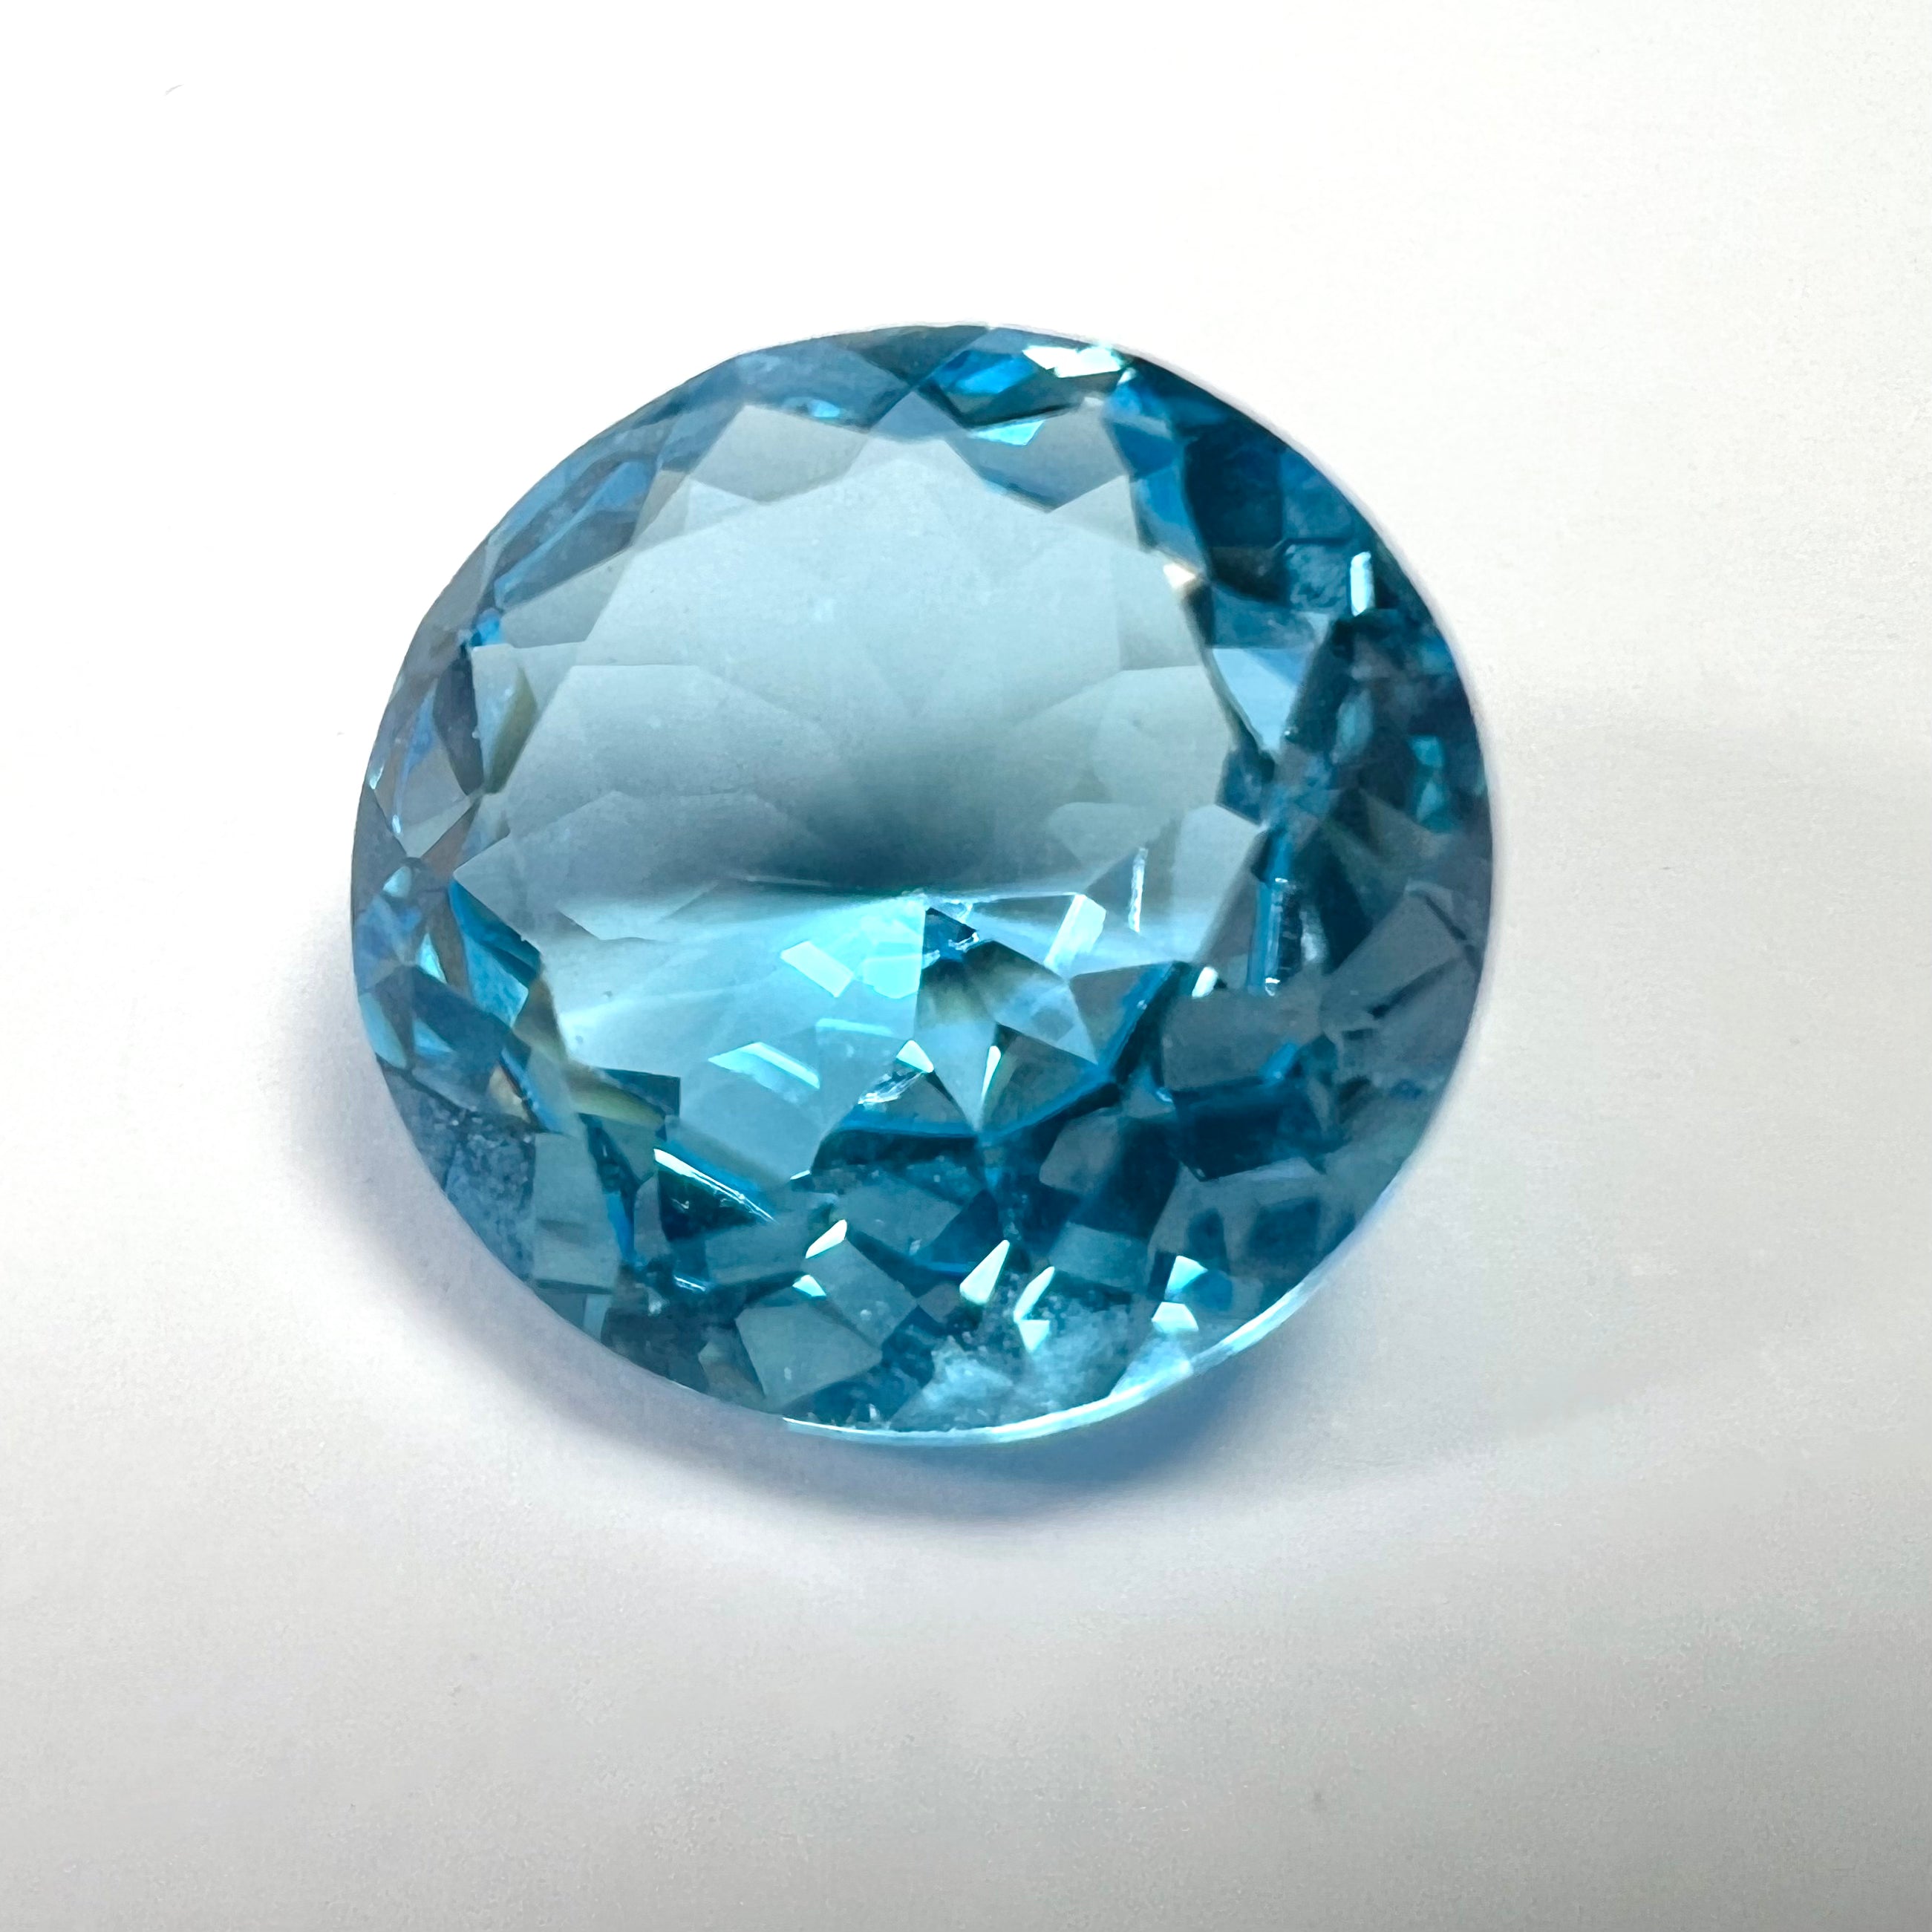 12.67CTW Loose Natural Round Cut Topaz 14.80x7.80mm Earth mined Gemstone